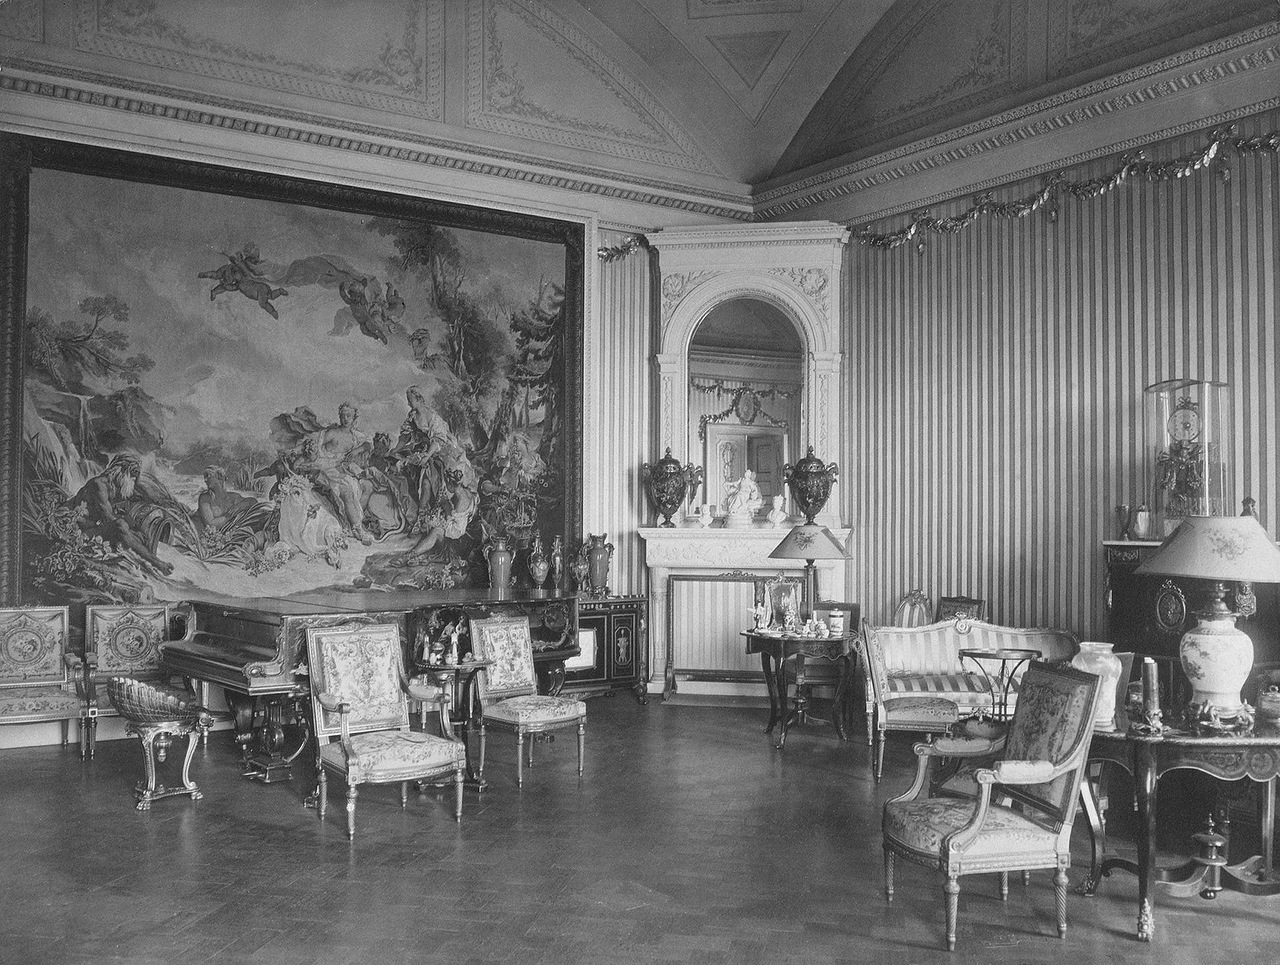 From October 1915 to November 1917, a hospital functioned in the Winter Palace. / Silver guest room. 